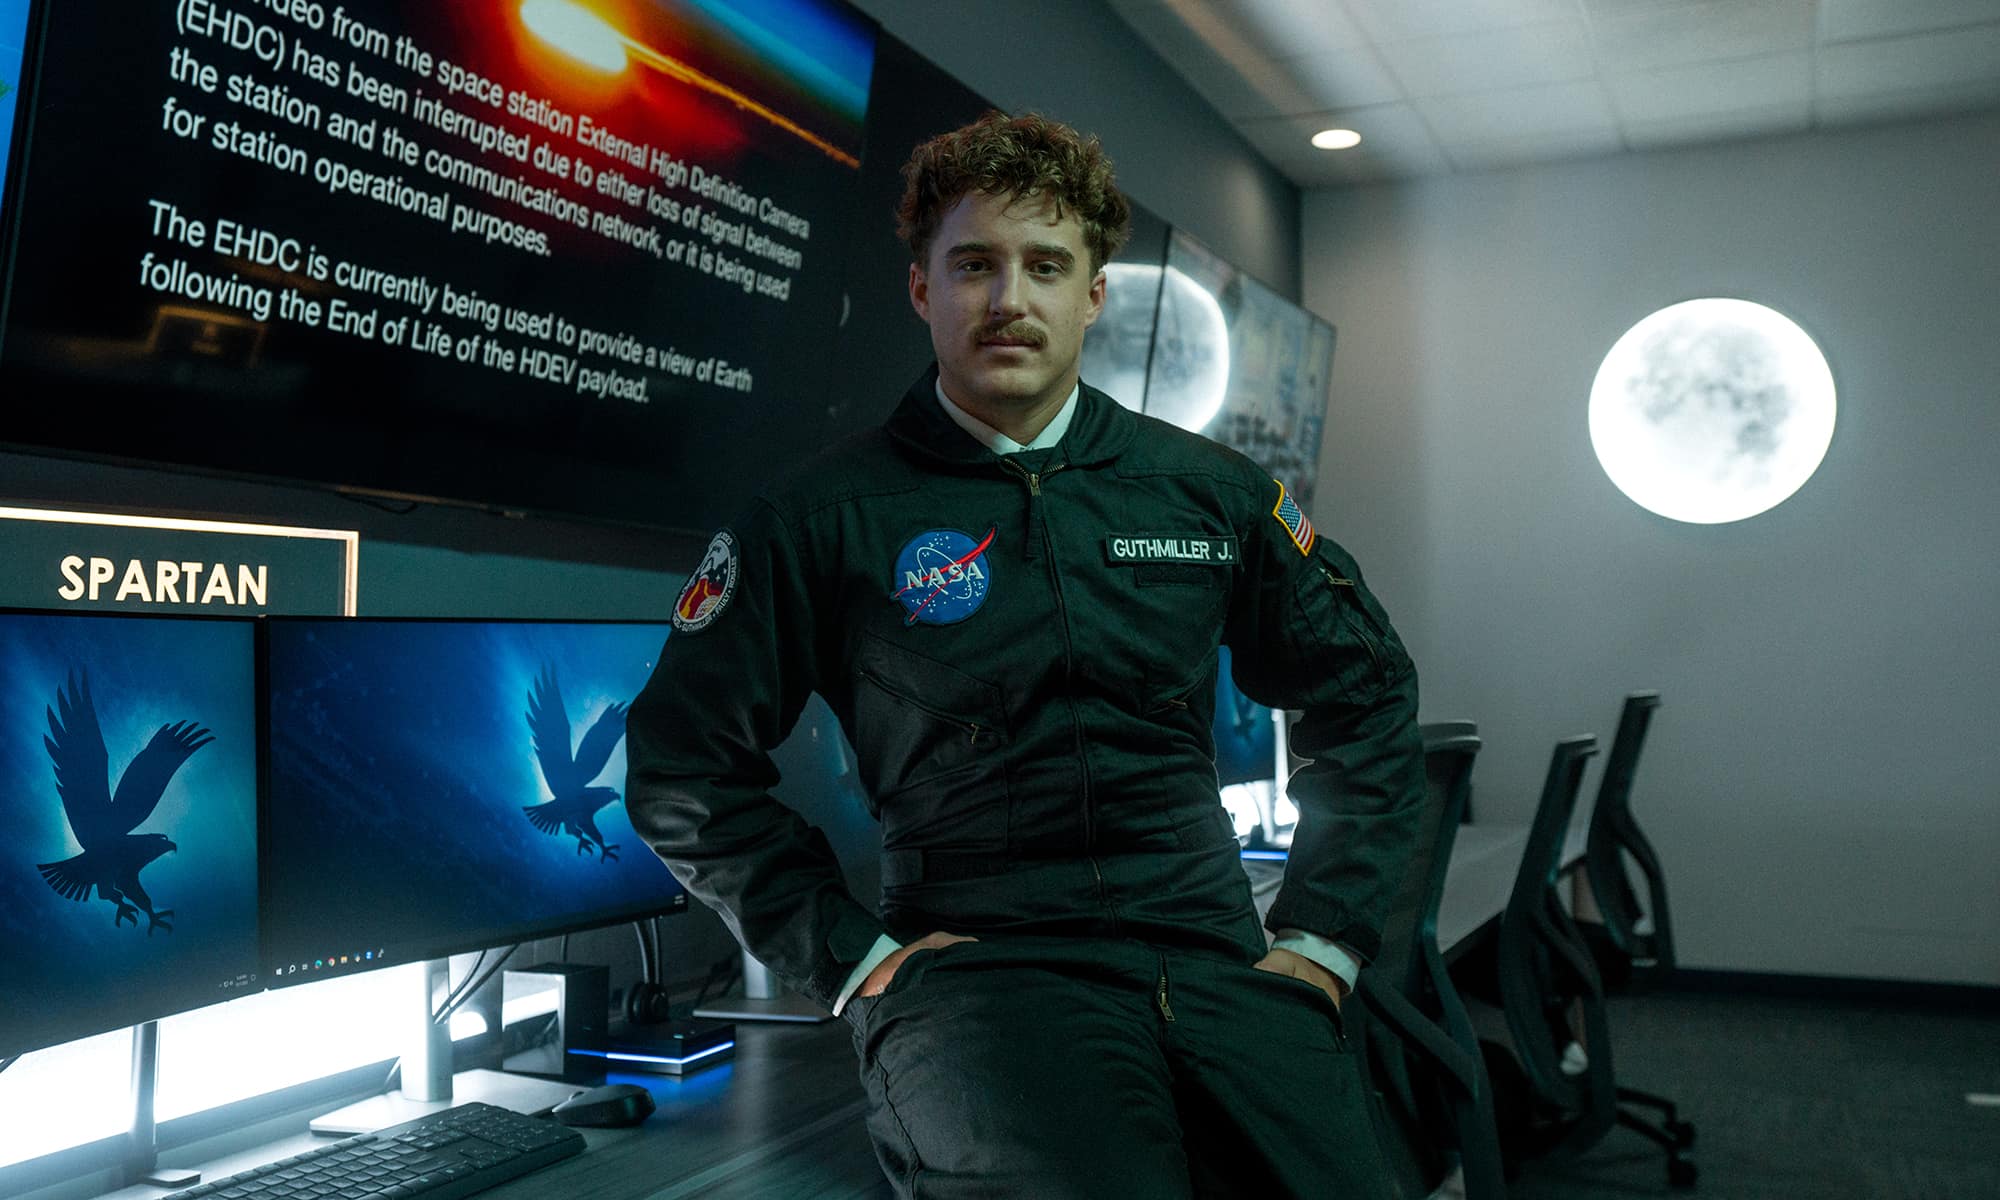 A student with a mustache wearing a jumpsuit with a NASA insignia leans casually against a desk with several computer monitors in a darkened room. A glowing moon shines on the wall behind him.